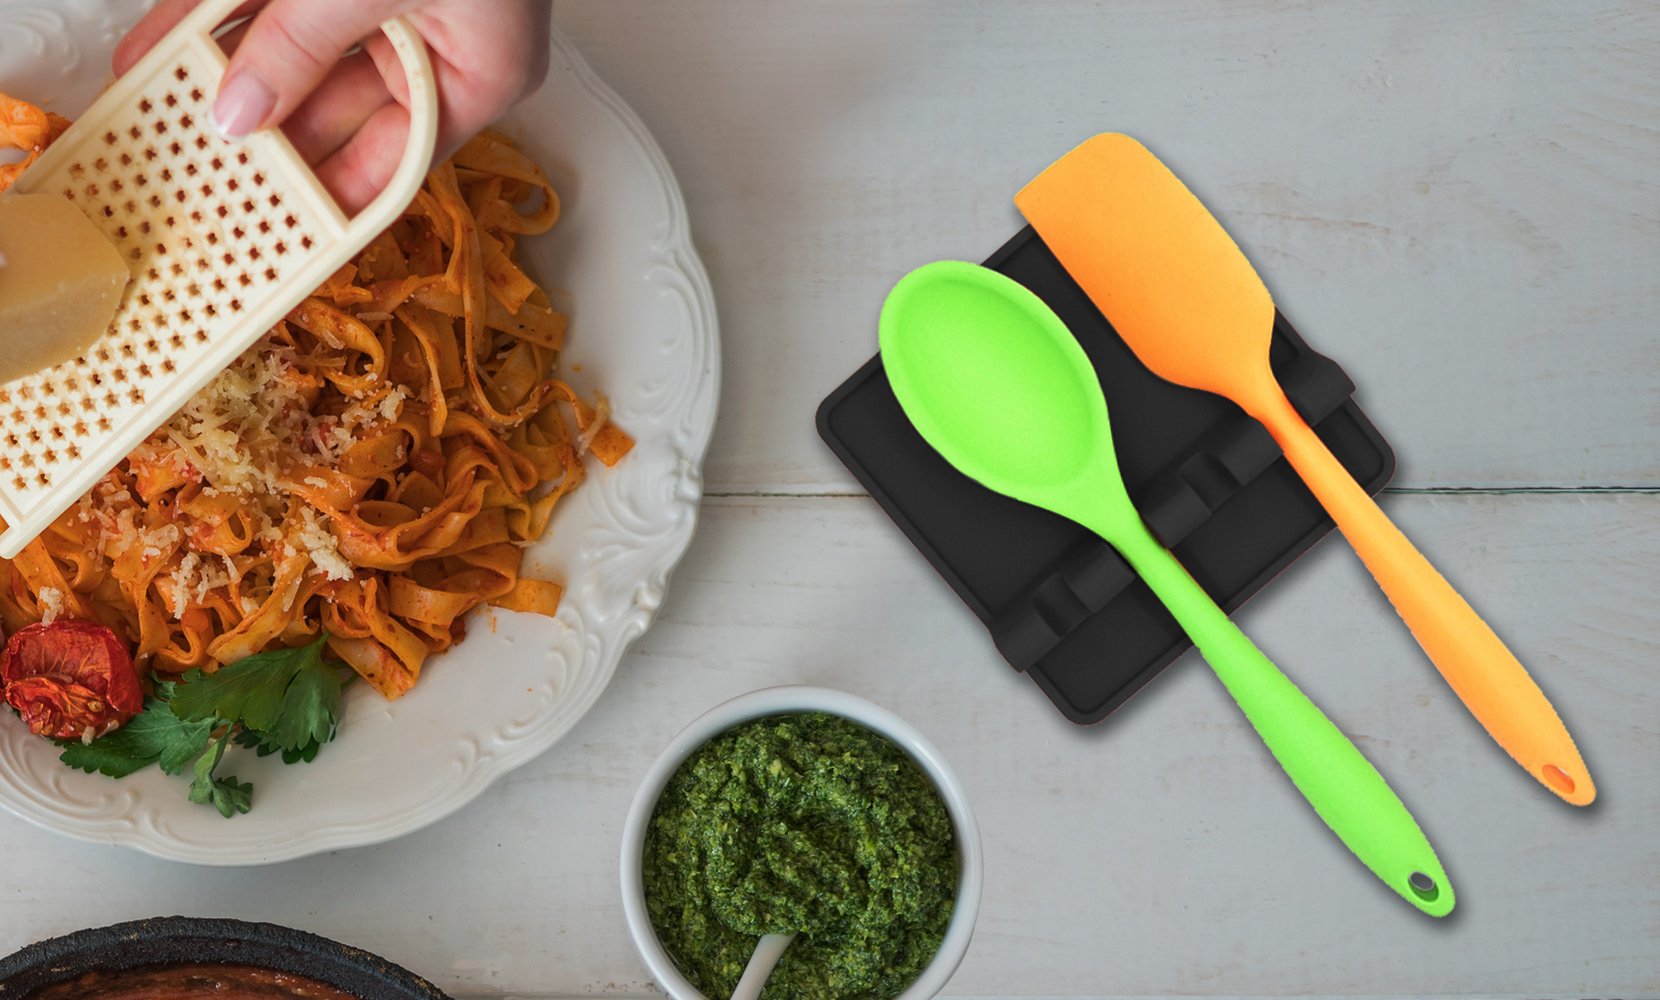 Non-Slip Heat Resistant Silicone Multiple Utensil Rest with Drip Pad